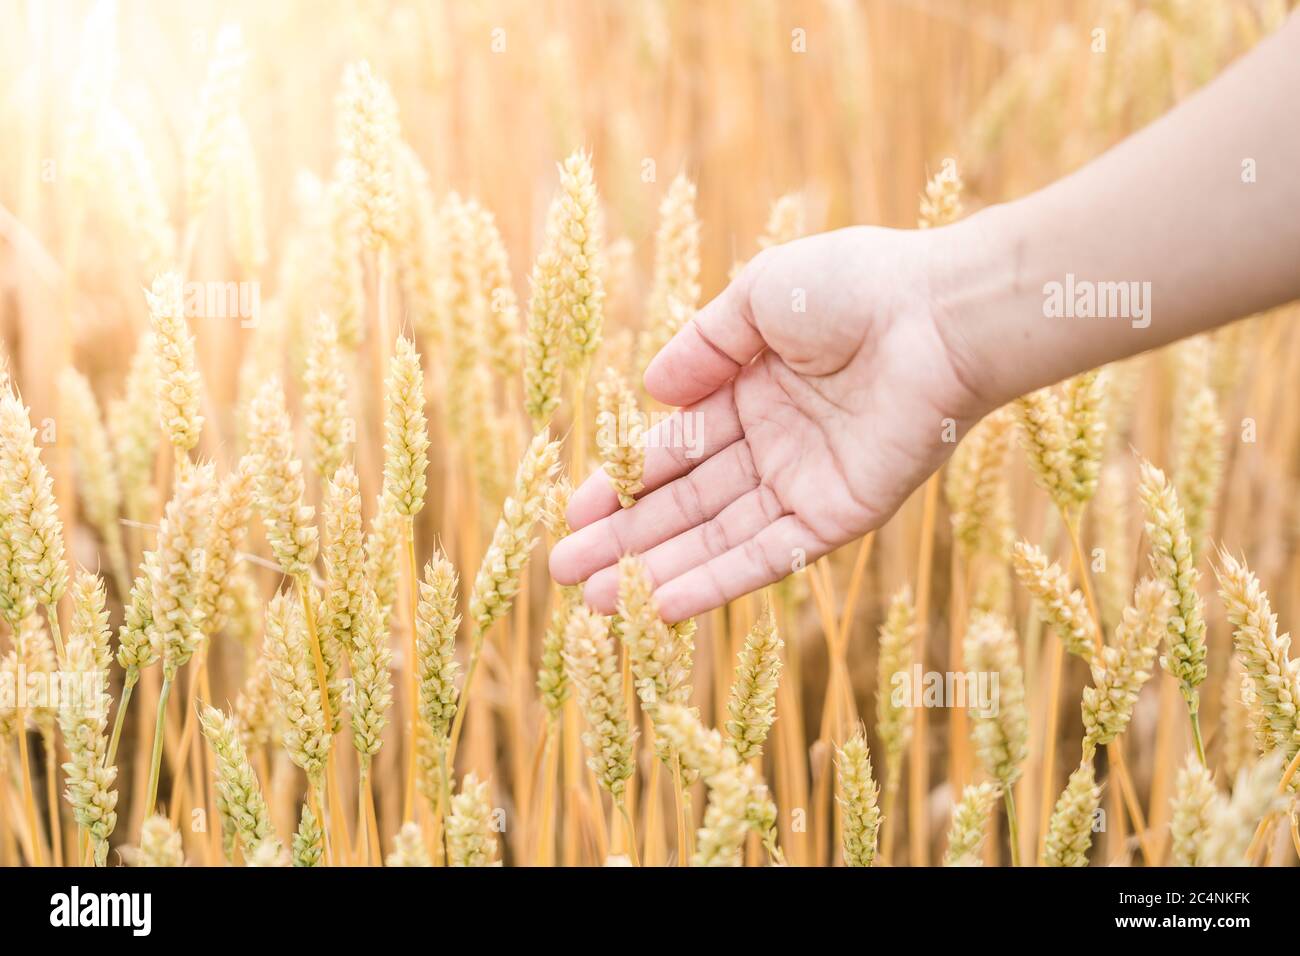 Barley golden fields and summer country side Scene background Stock Photo